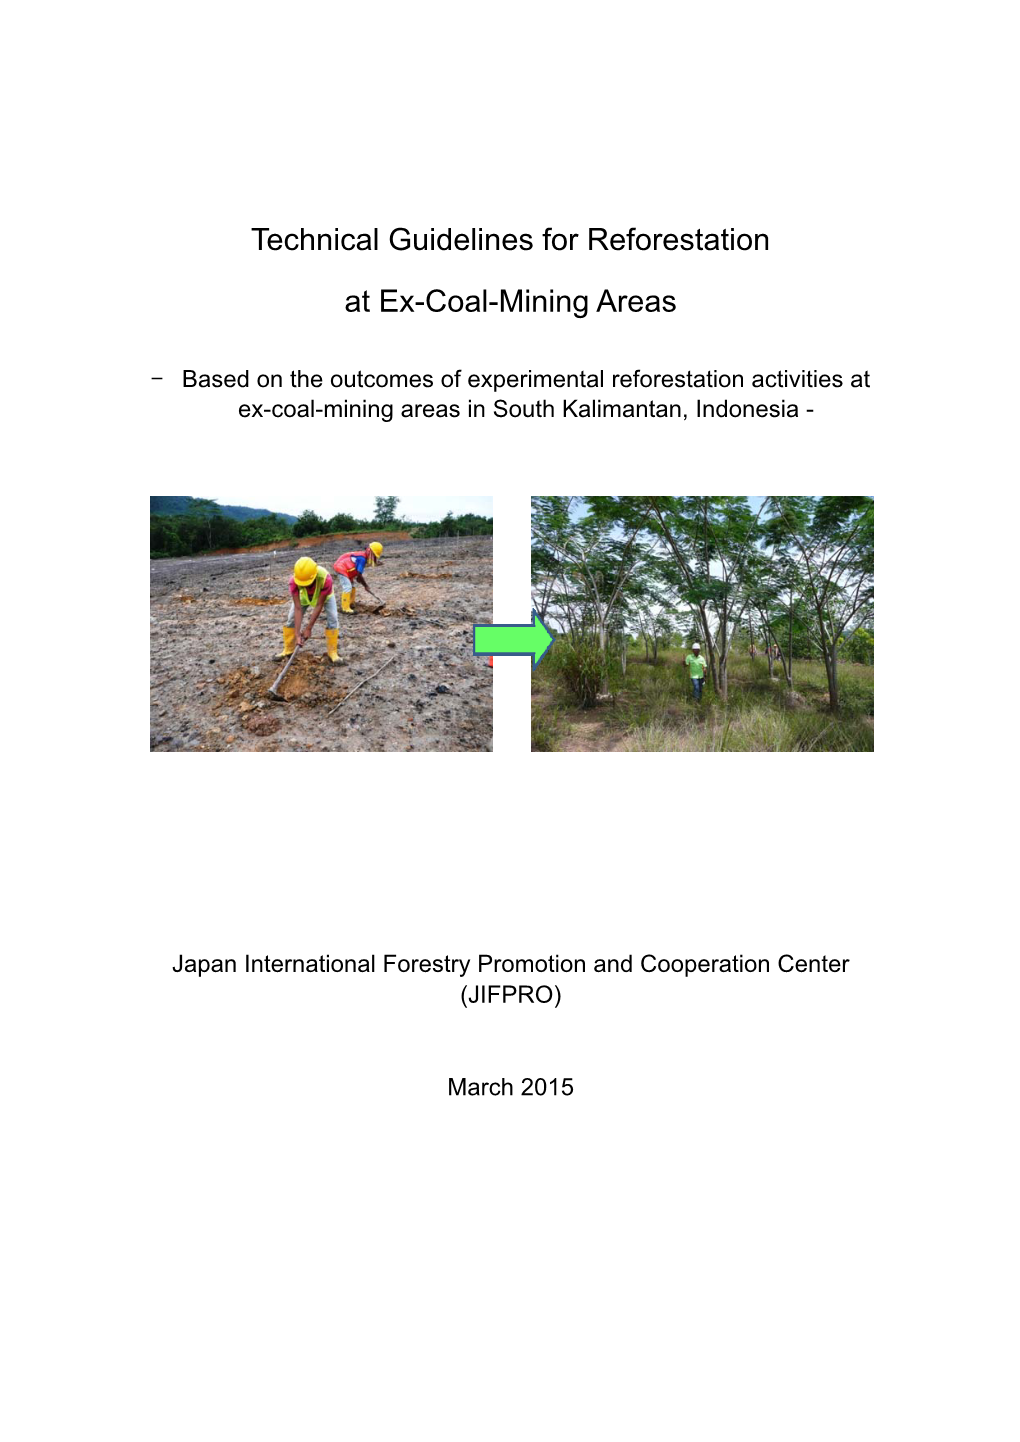 Technical Guidelines for Reforestation at Ex-Coal-Mining Areas